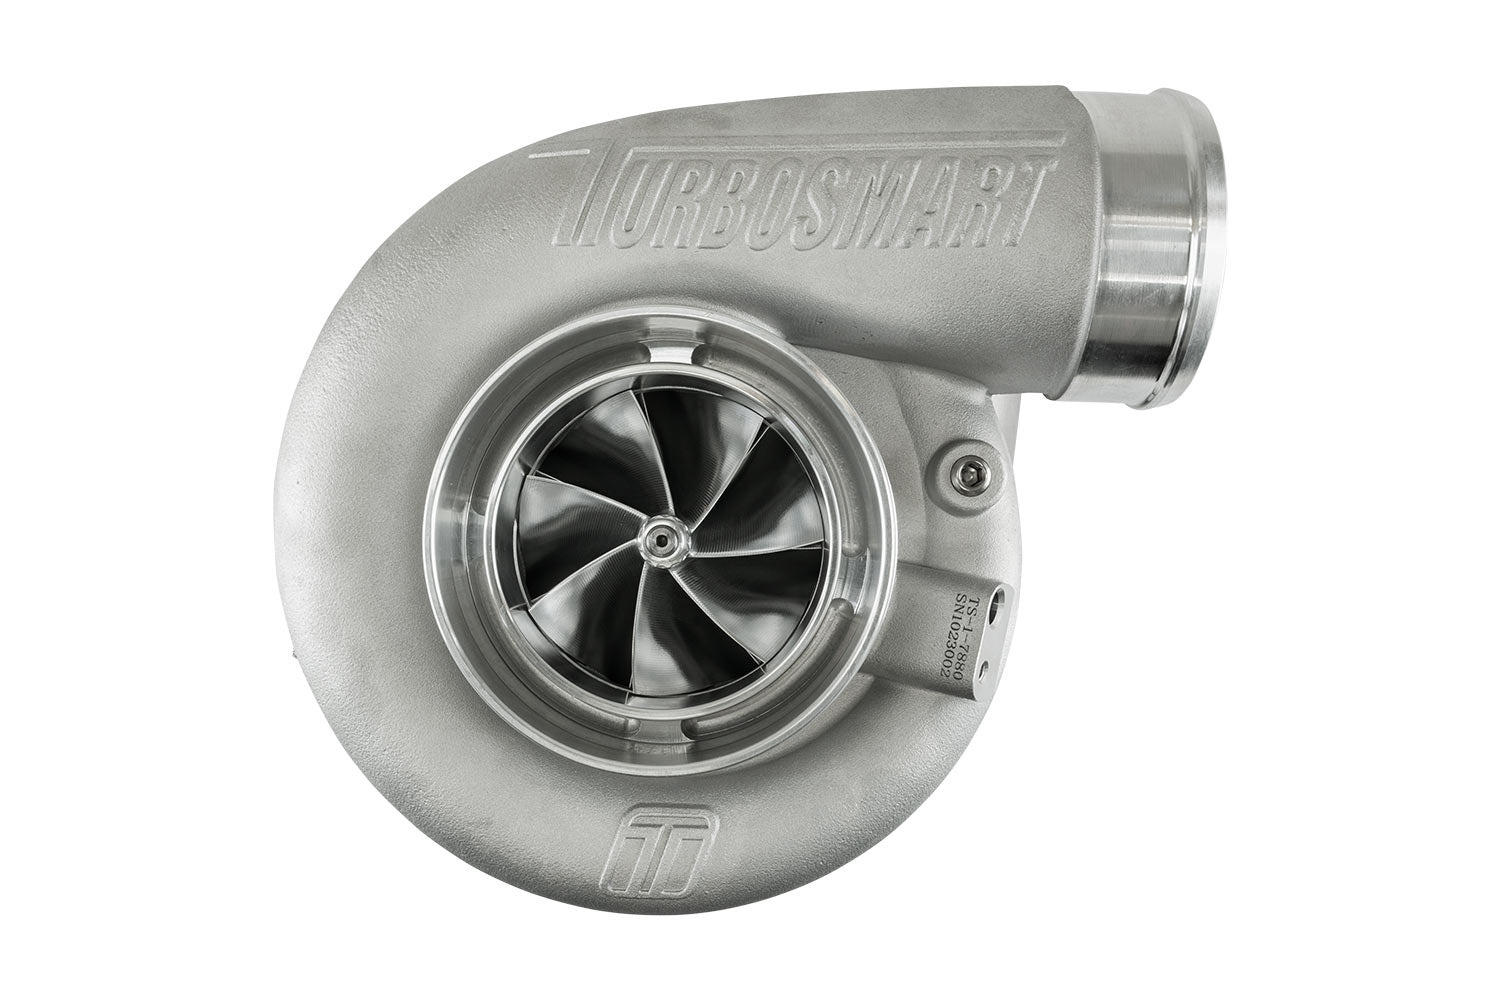 TS-2 Performance Turbocharger (Water Cooled) 7170 V-Band 0.96AR Externally Wastegated